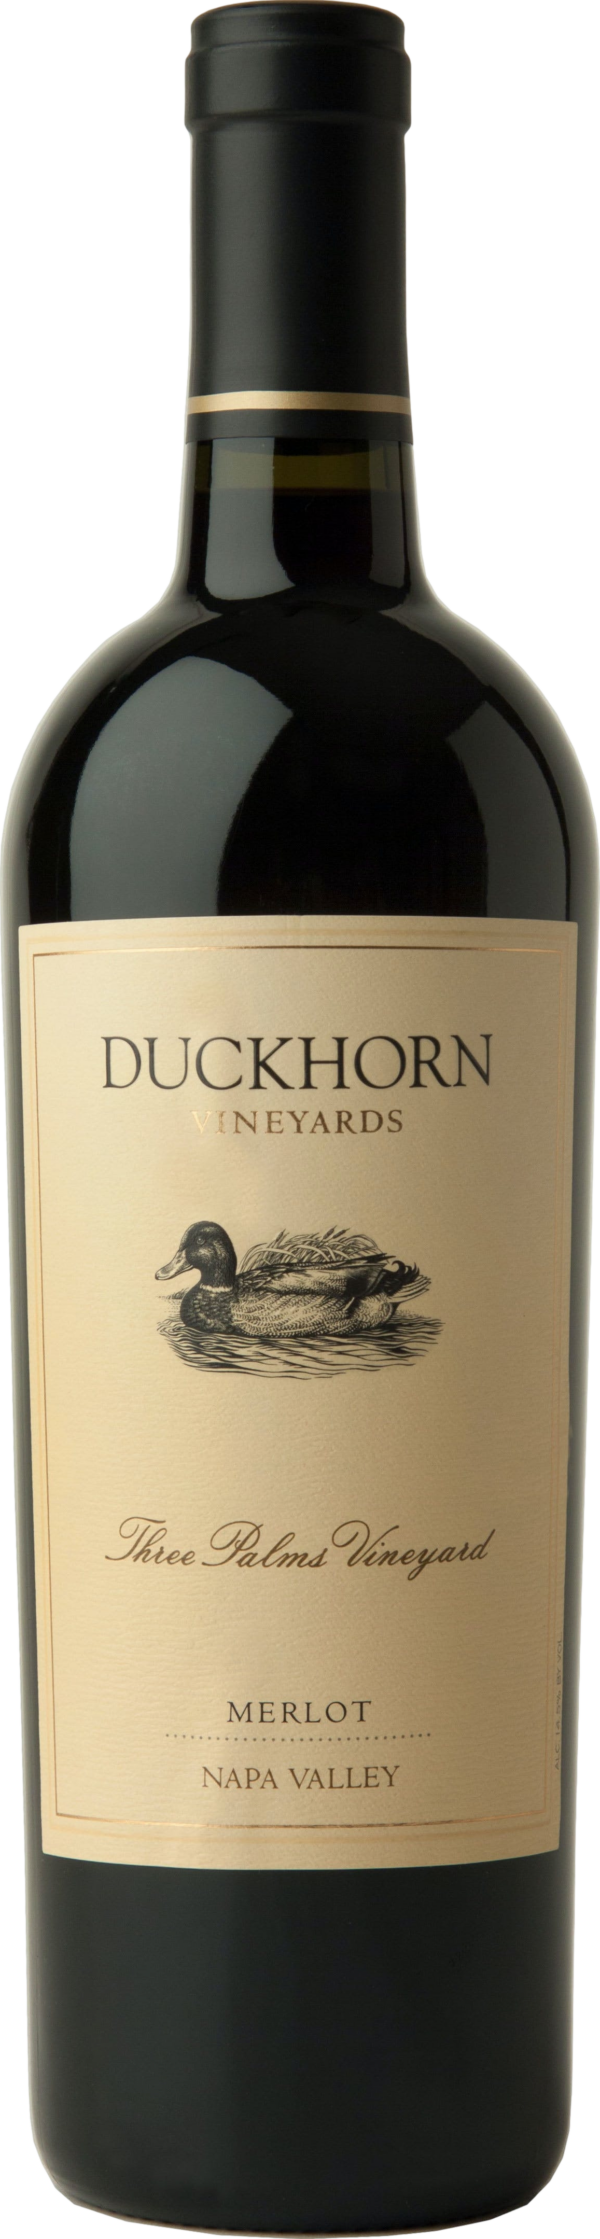 Product image of Duckhorn Three Palms Merlot 2019 from 8wines